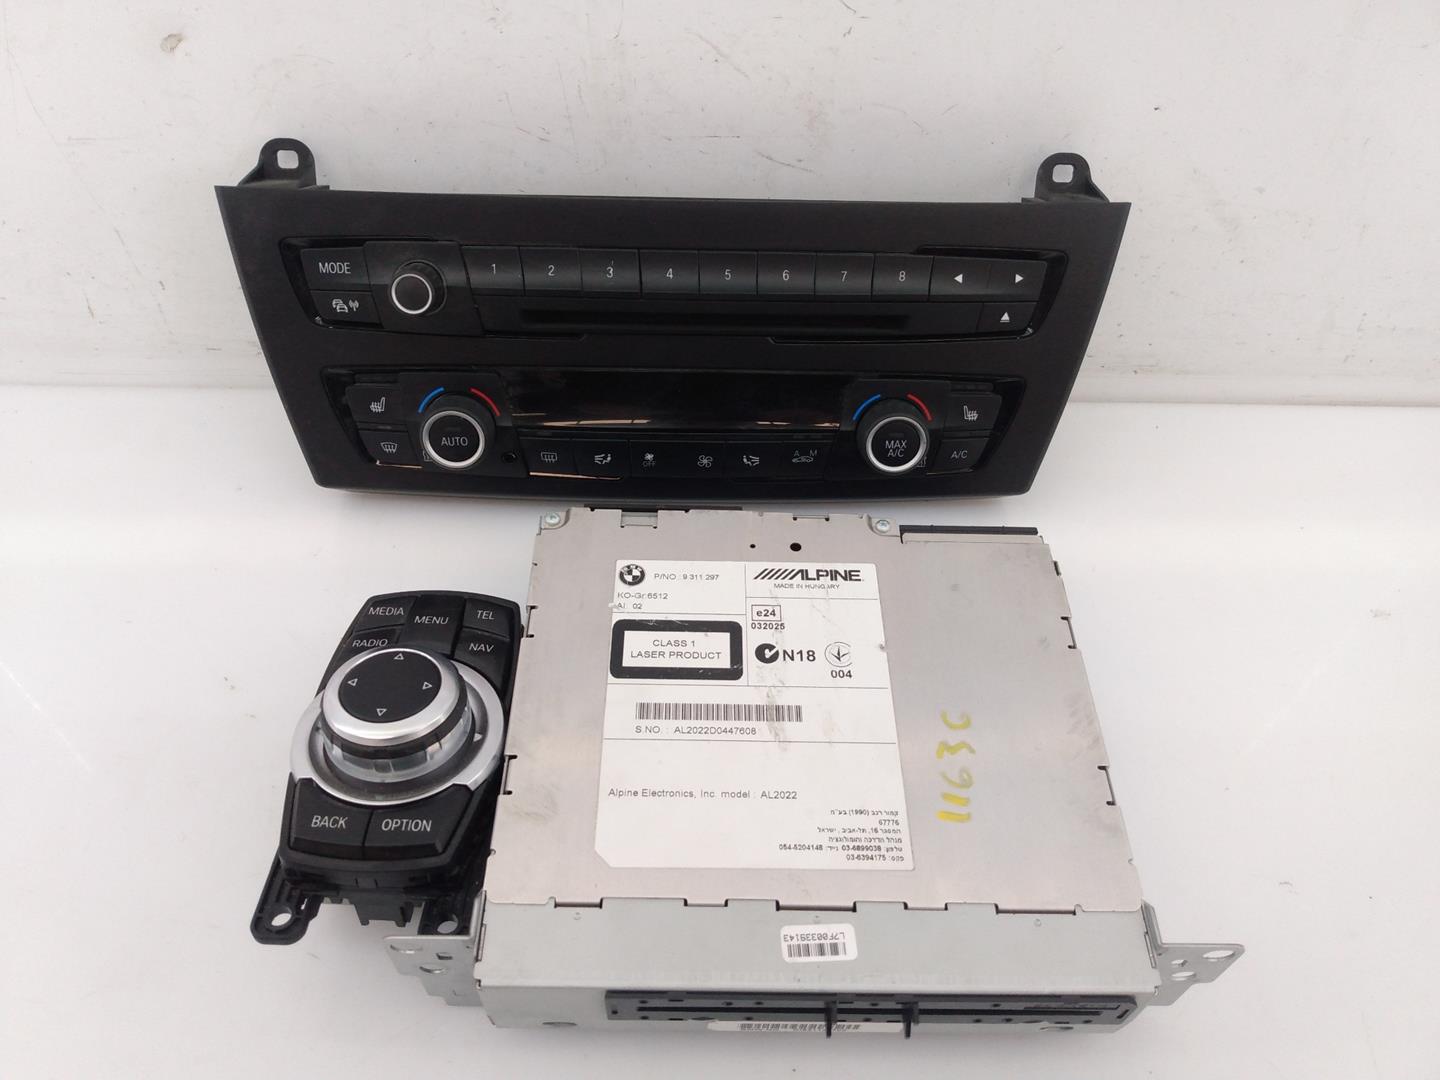 BMW 1 Series F20/F21 (2011-2020) Music Player With GPS 6582926795502, AL2022, E3-A2-33-4 23287597